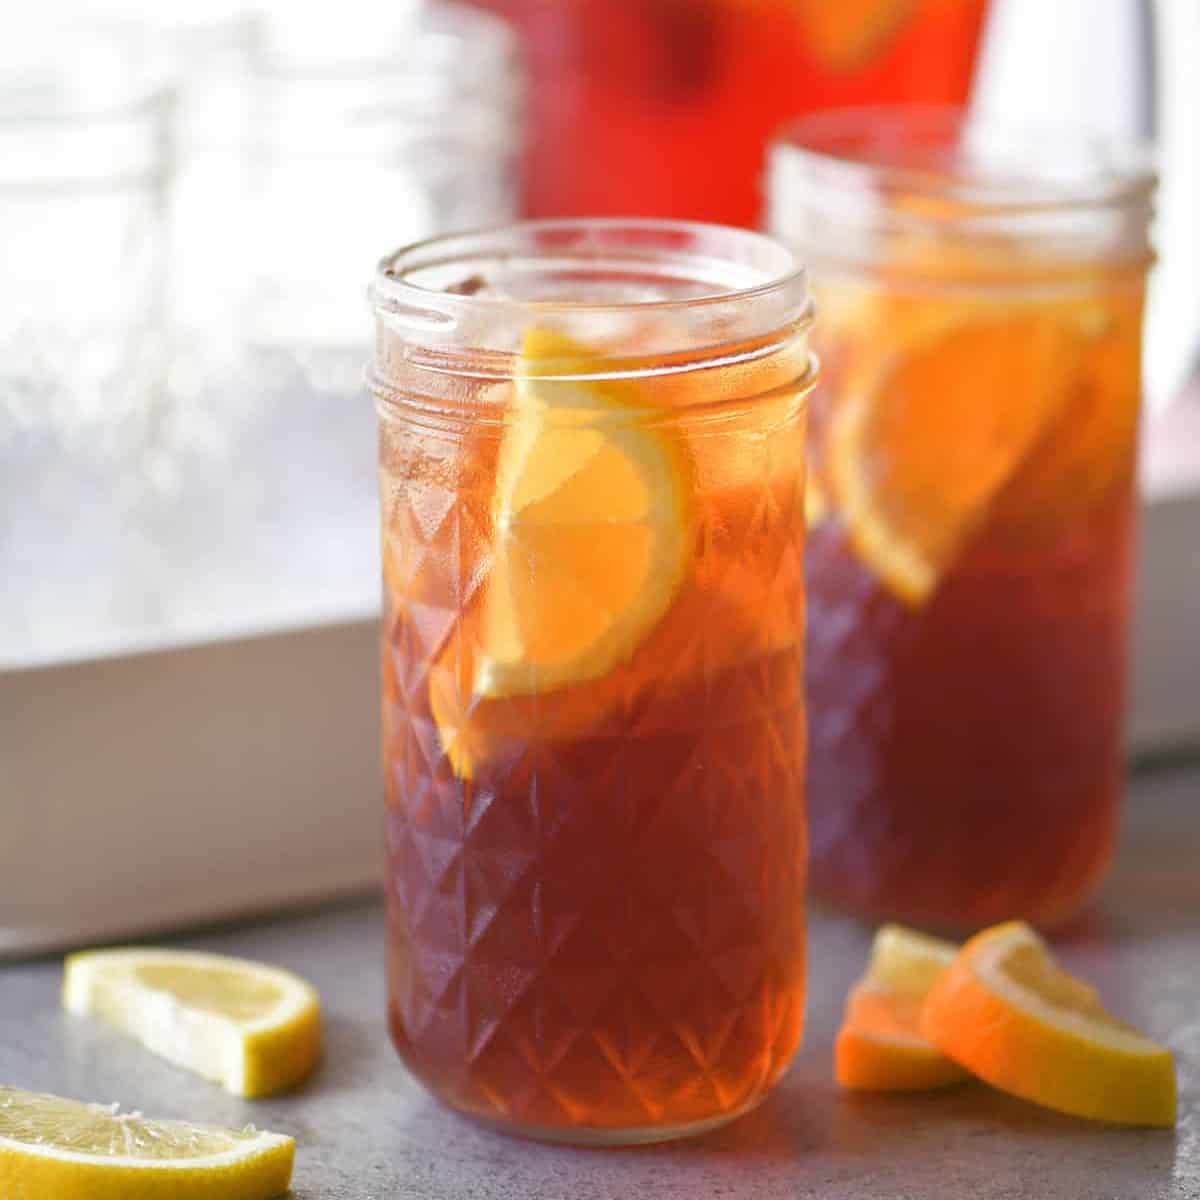 two glasses of sweet tea with slices of lemon.